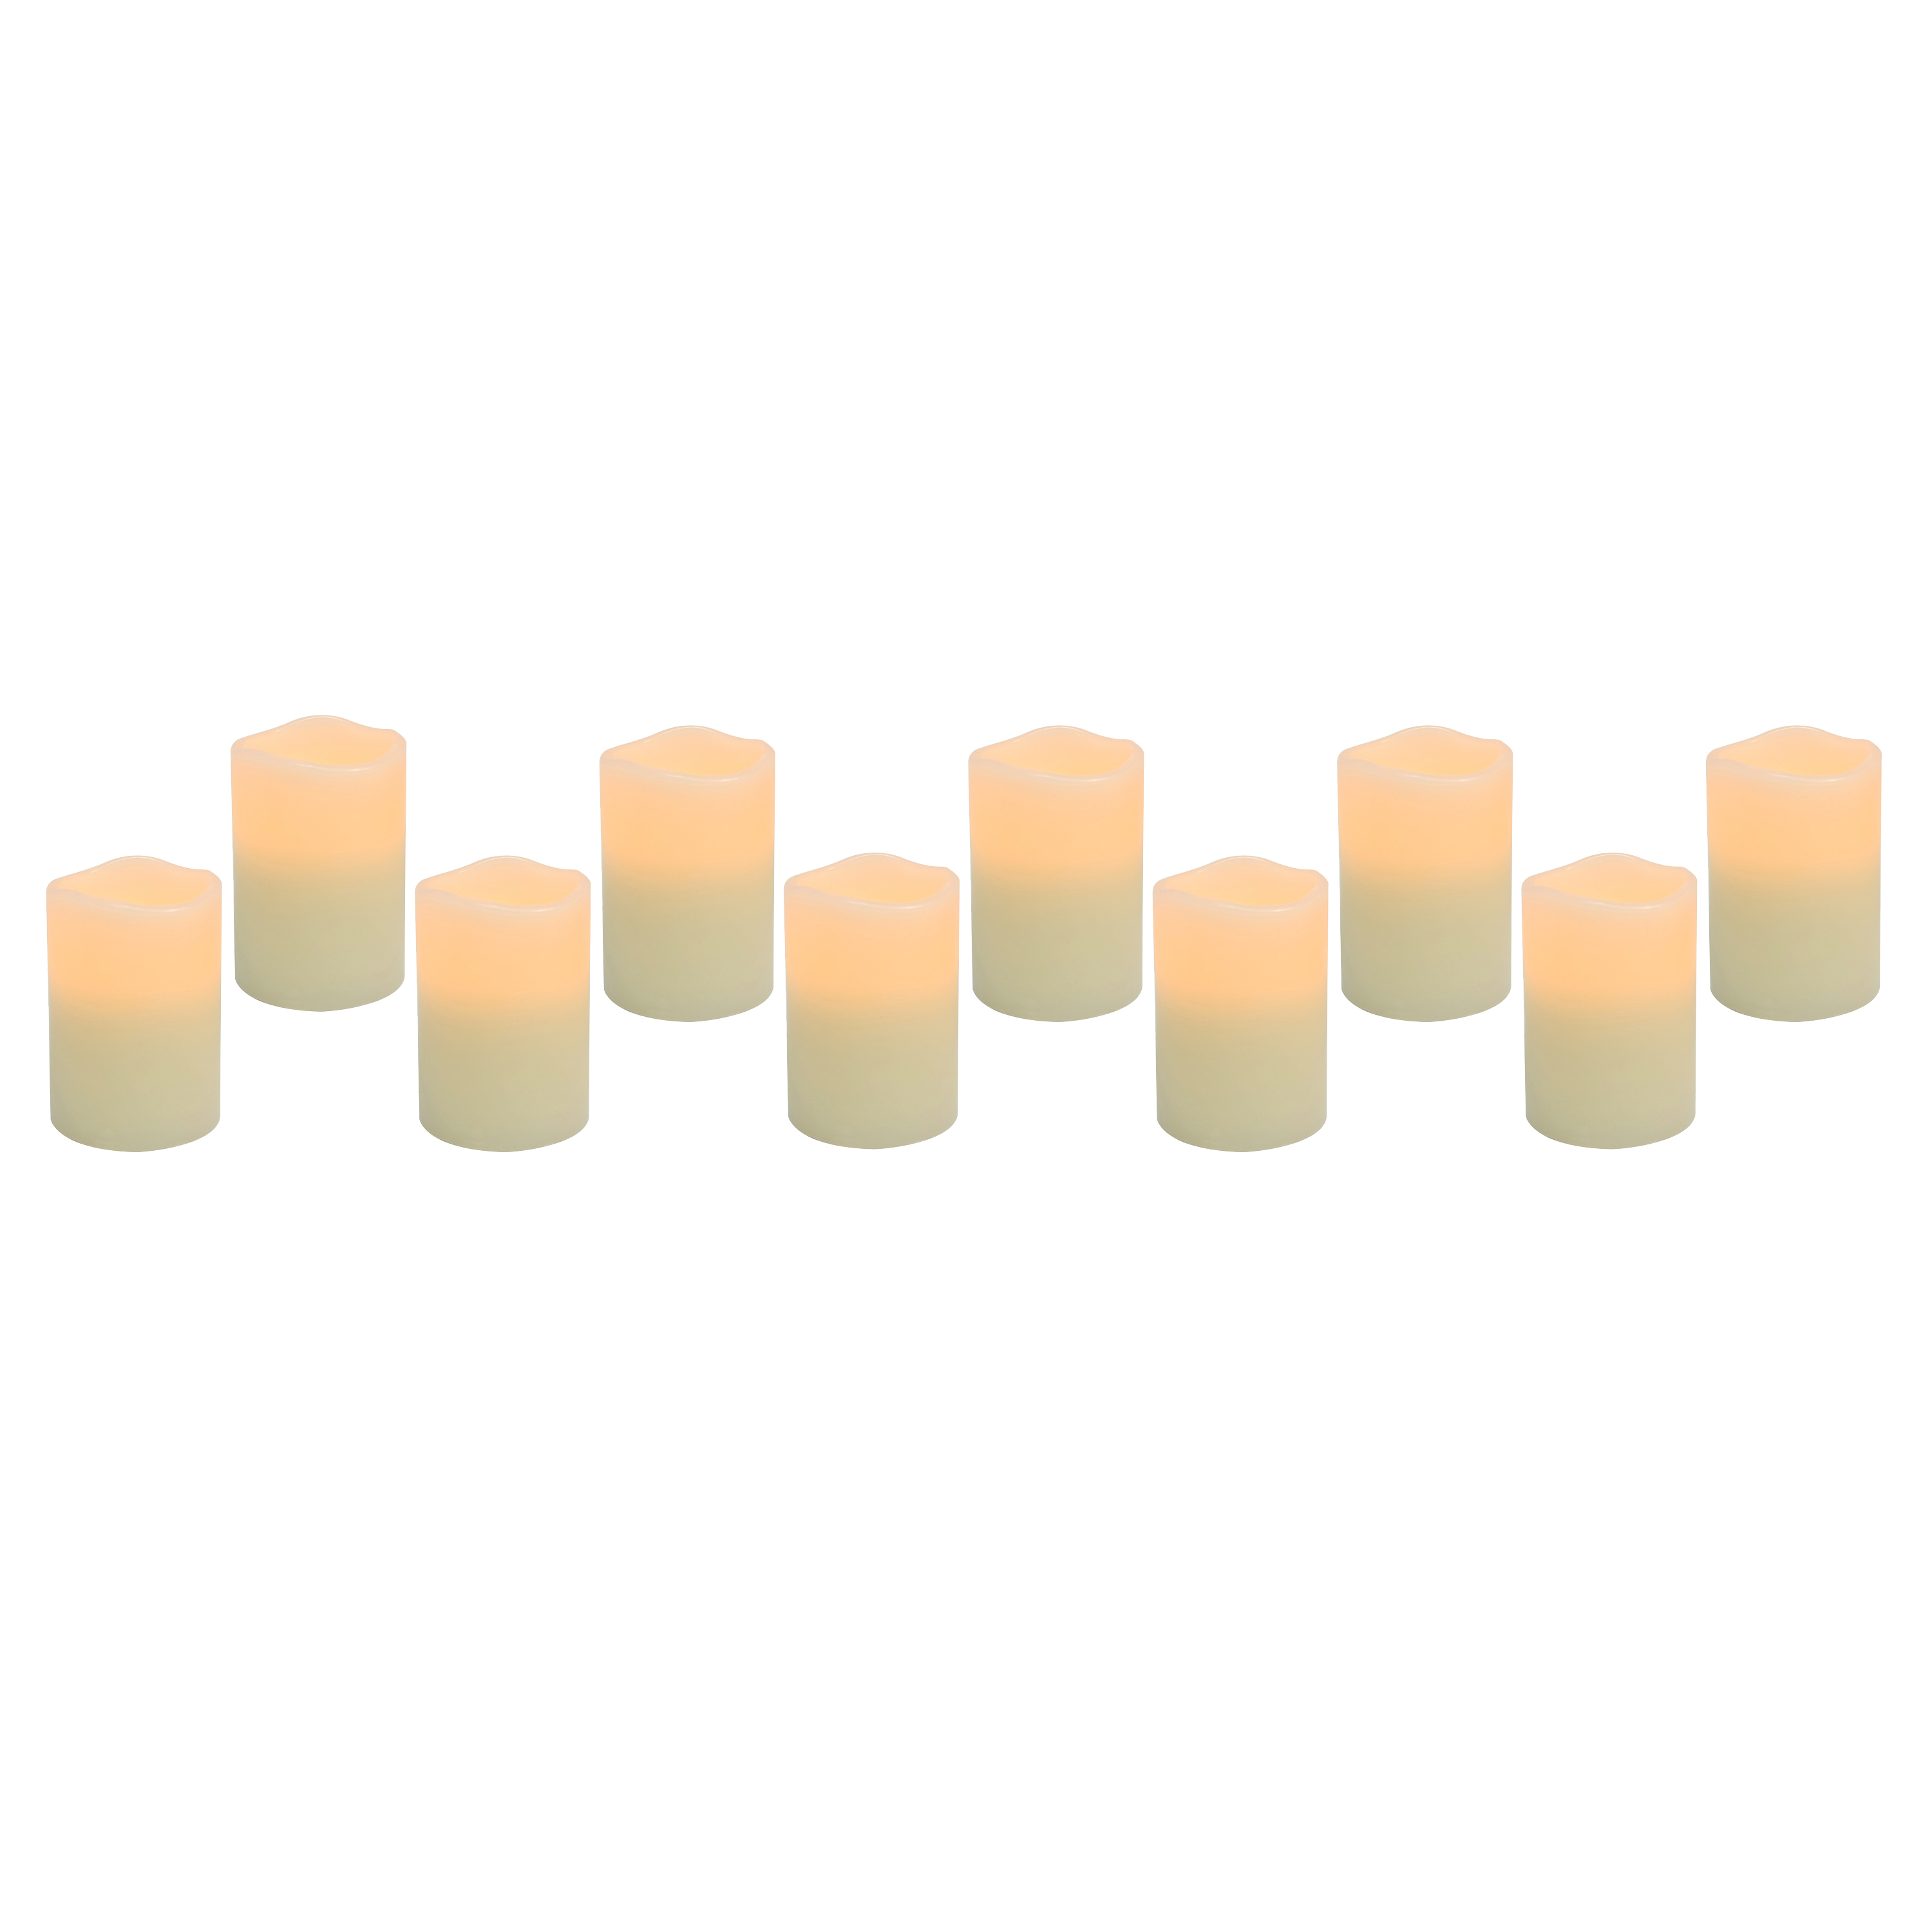 Flameless 2.8in LED Votive Candles, 10-Pack - image 1 of 1